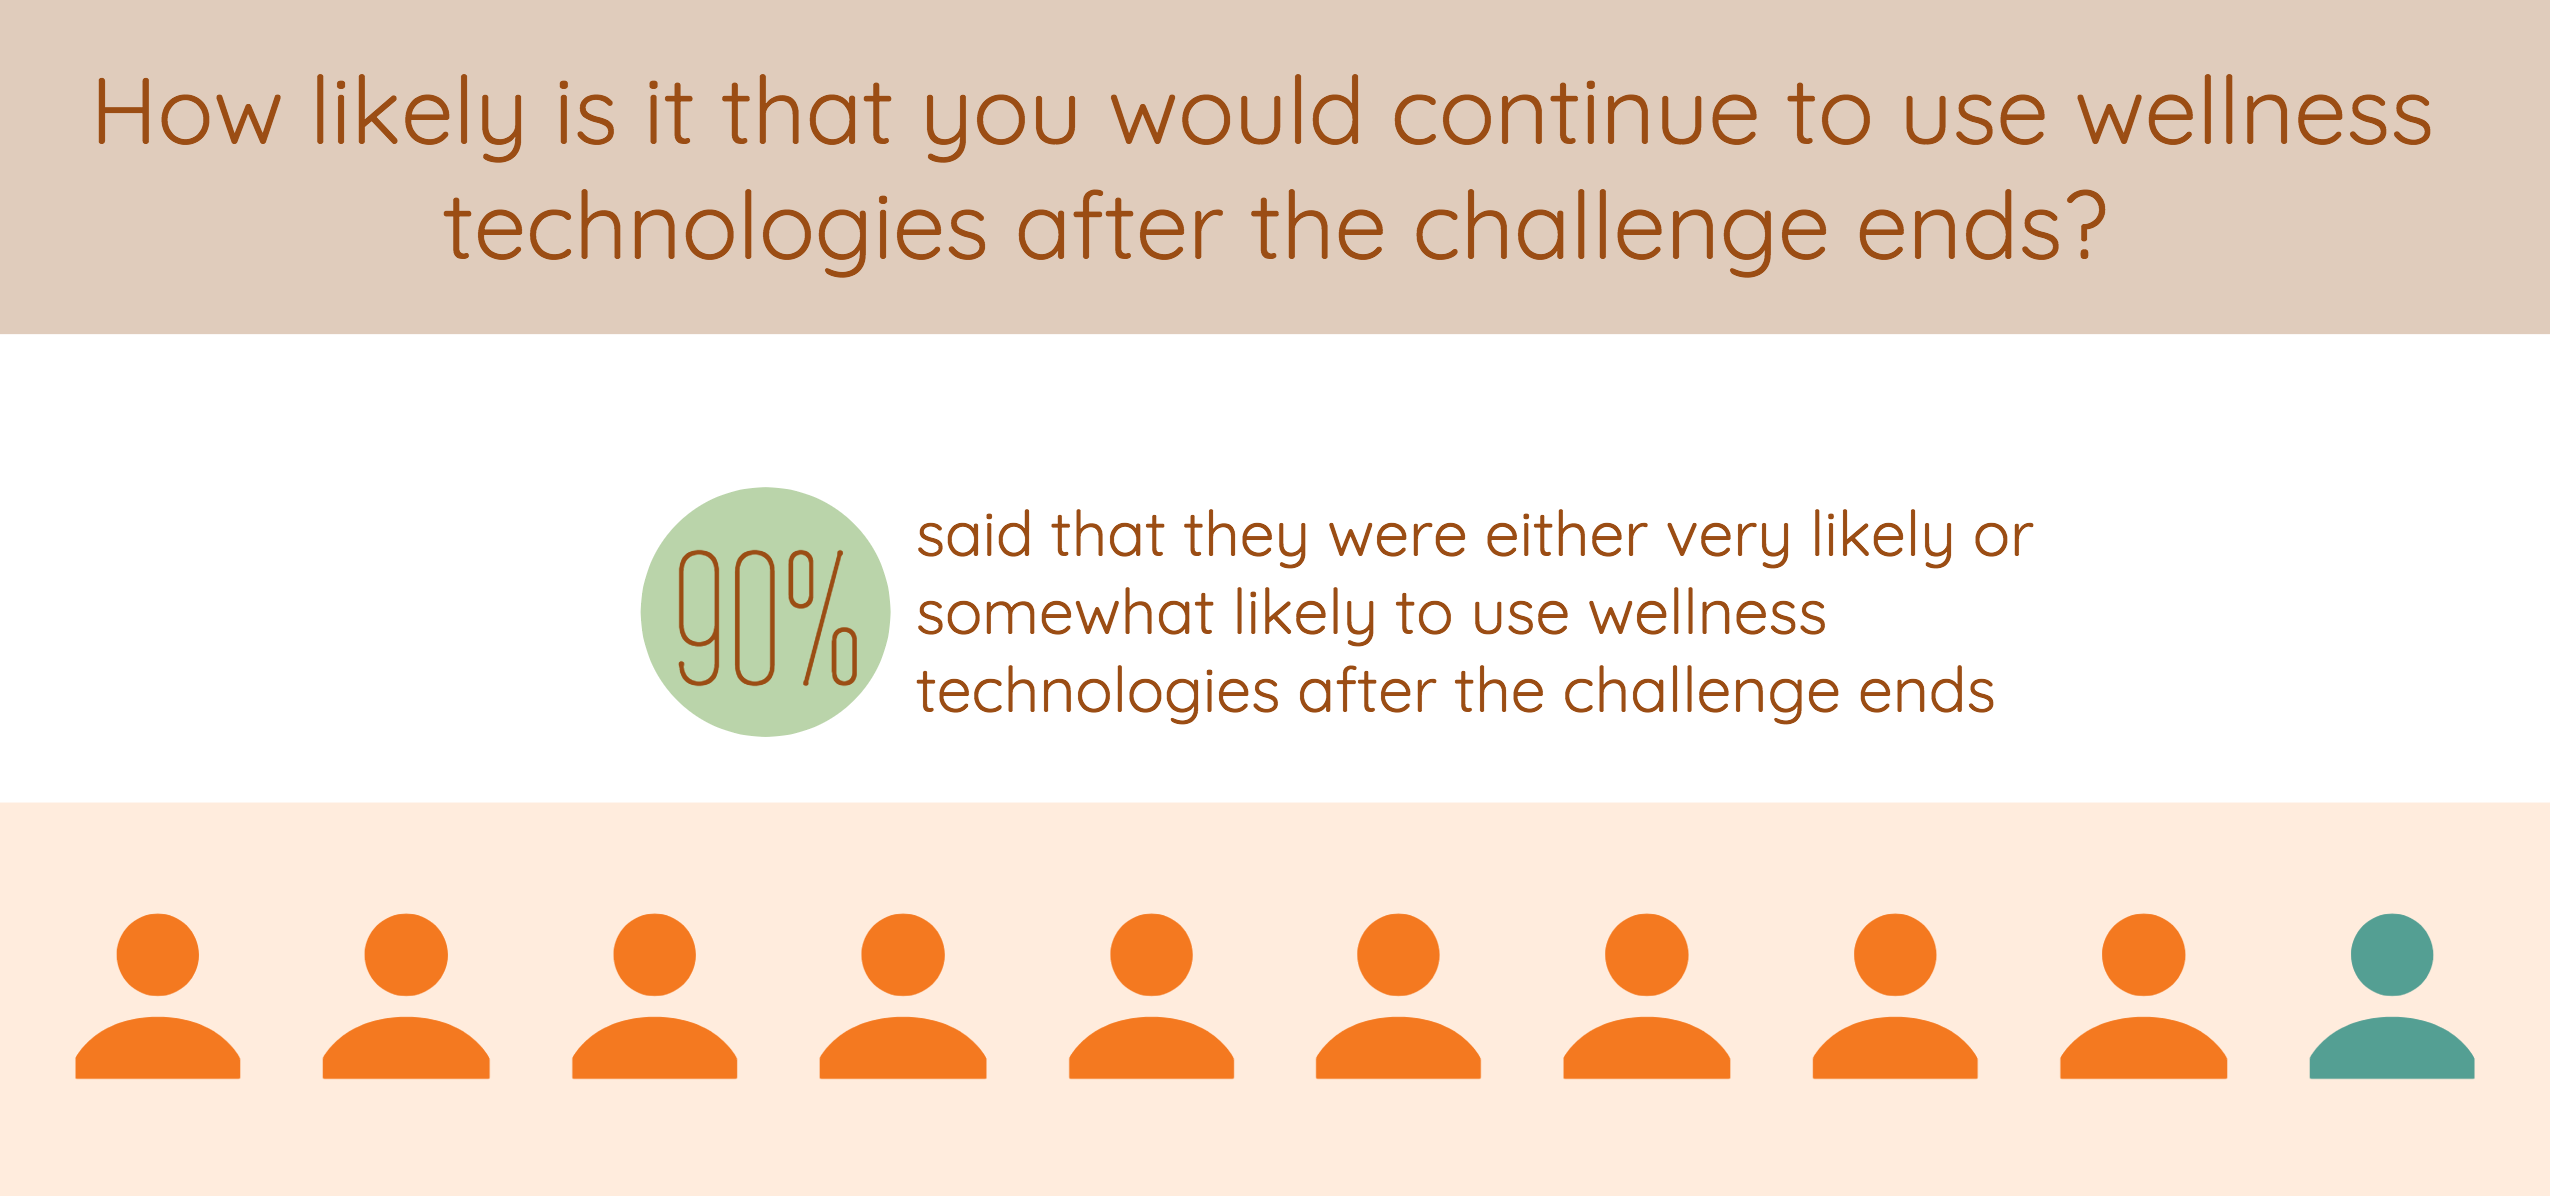 How likely is it that participant would continue to use wellness technologies after Wellable's wellness challenge ends?